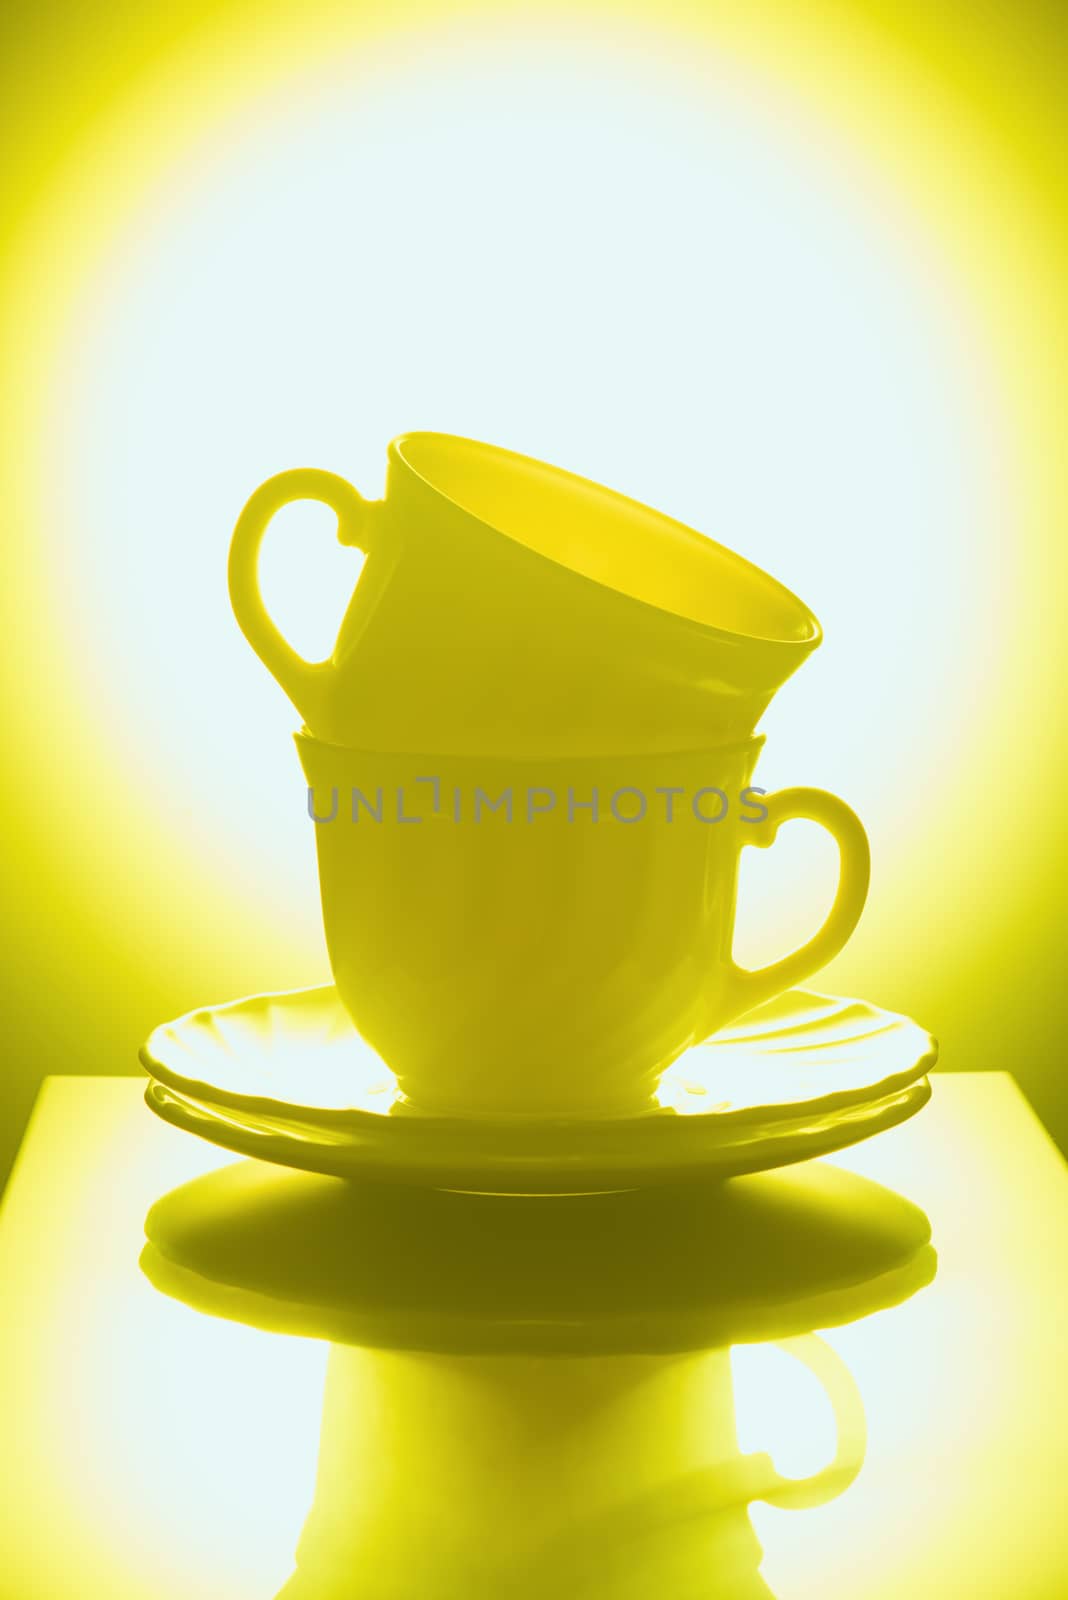 Cups for tea on a yellow background by fotooxotnik